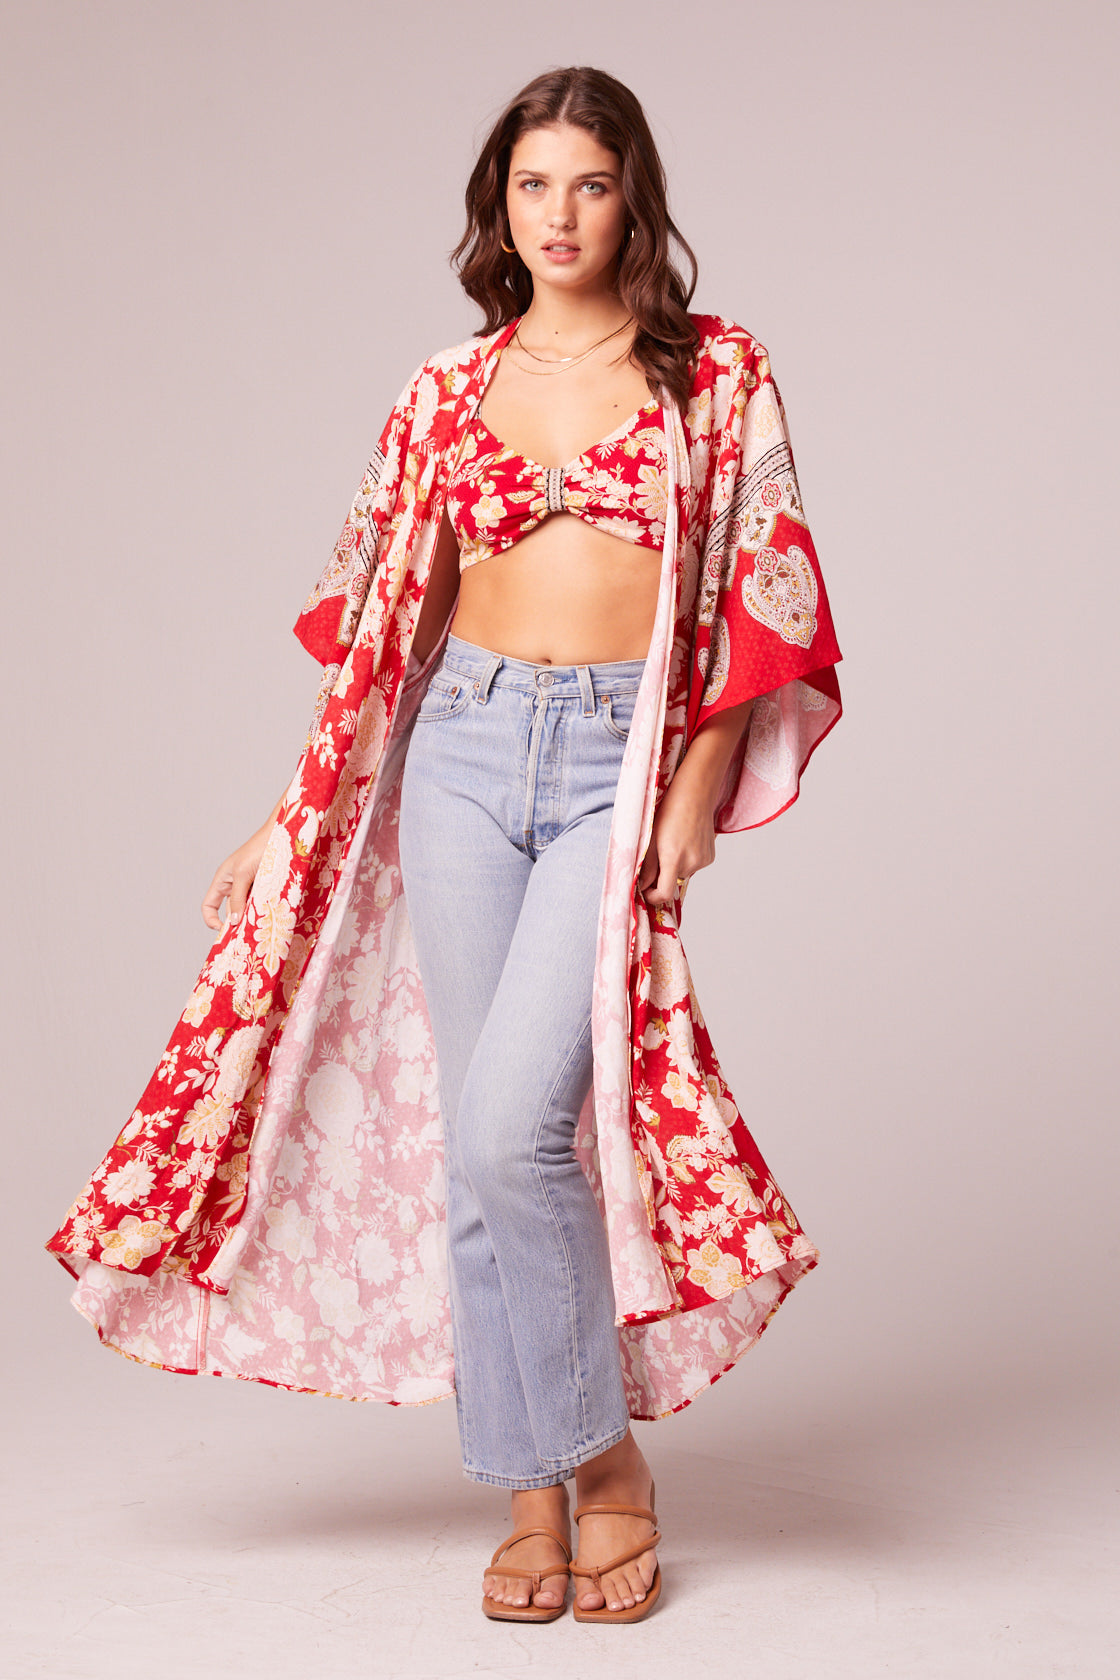 From Paris With Love Red Floral Kimono